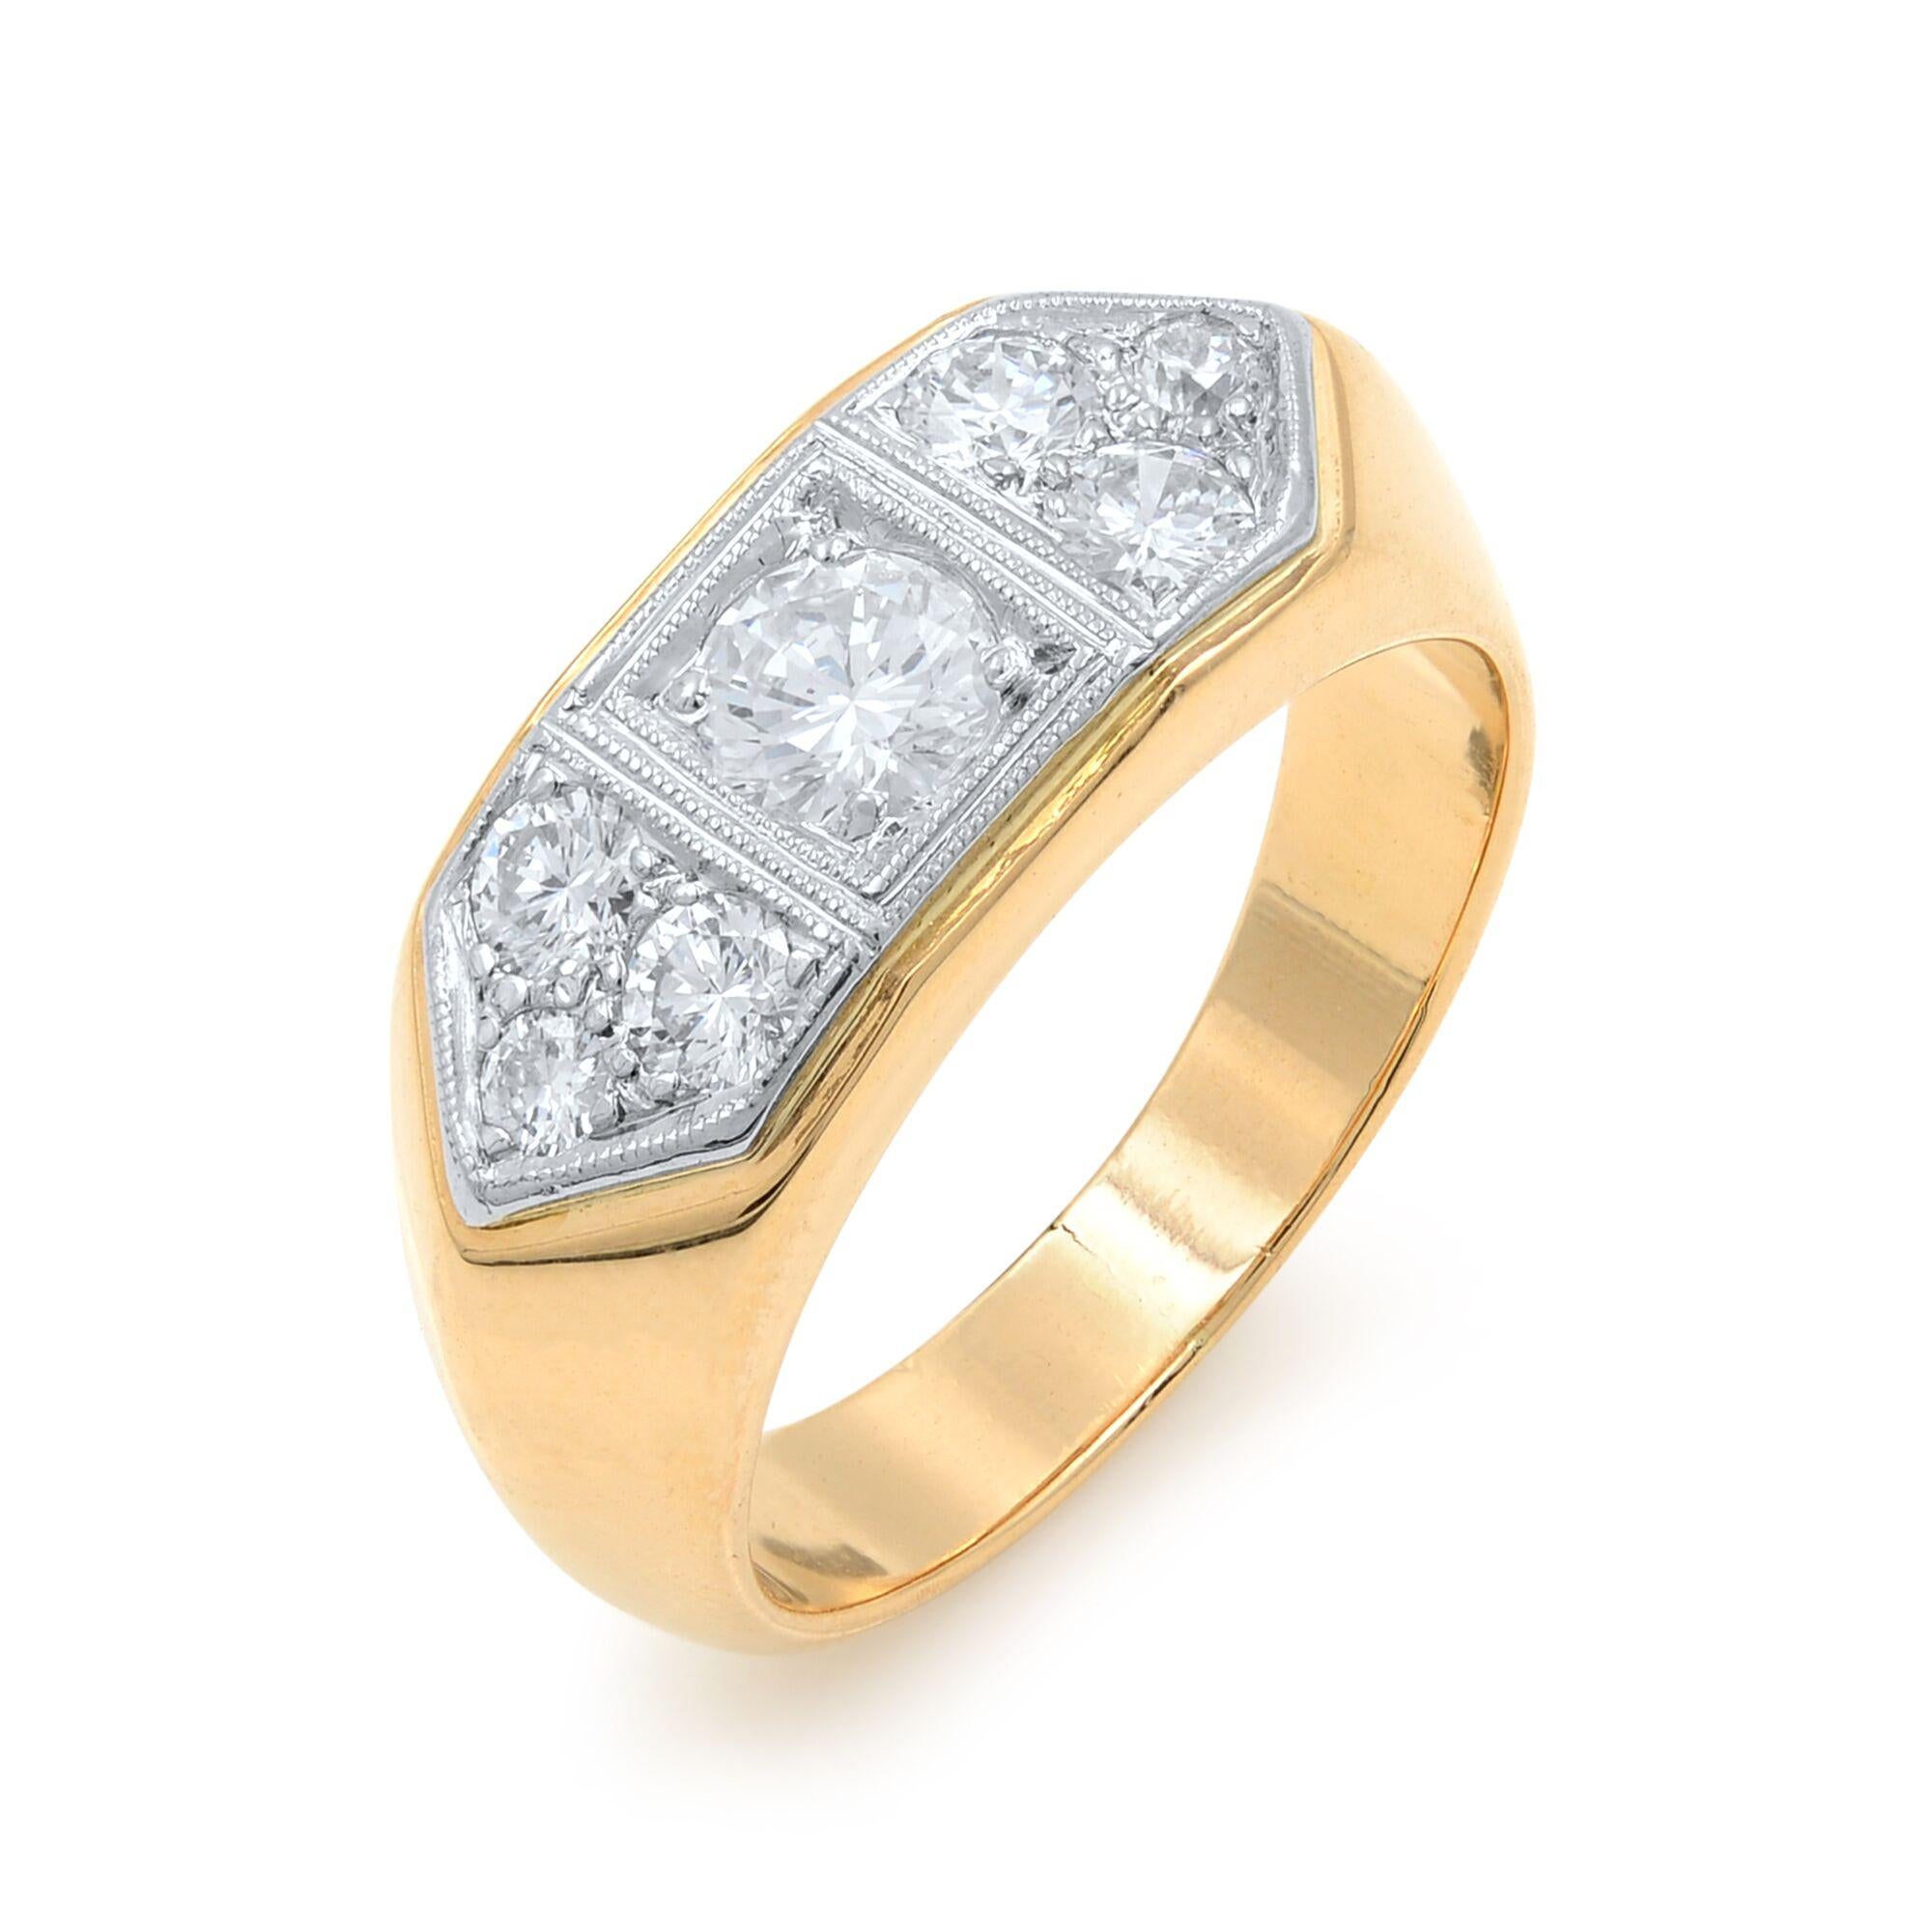 This is an elegant 18k rose gold men's diamond ring. The ring is centered with sparkling round cut diamonds set in white gold that weighs approximately 1.35cts. The center stone of the ring is 0.75ct and the side stones are 0.60 cts. The total